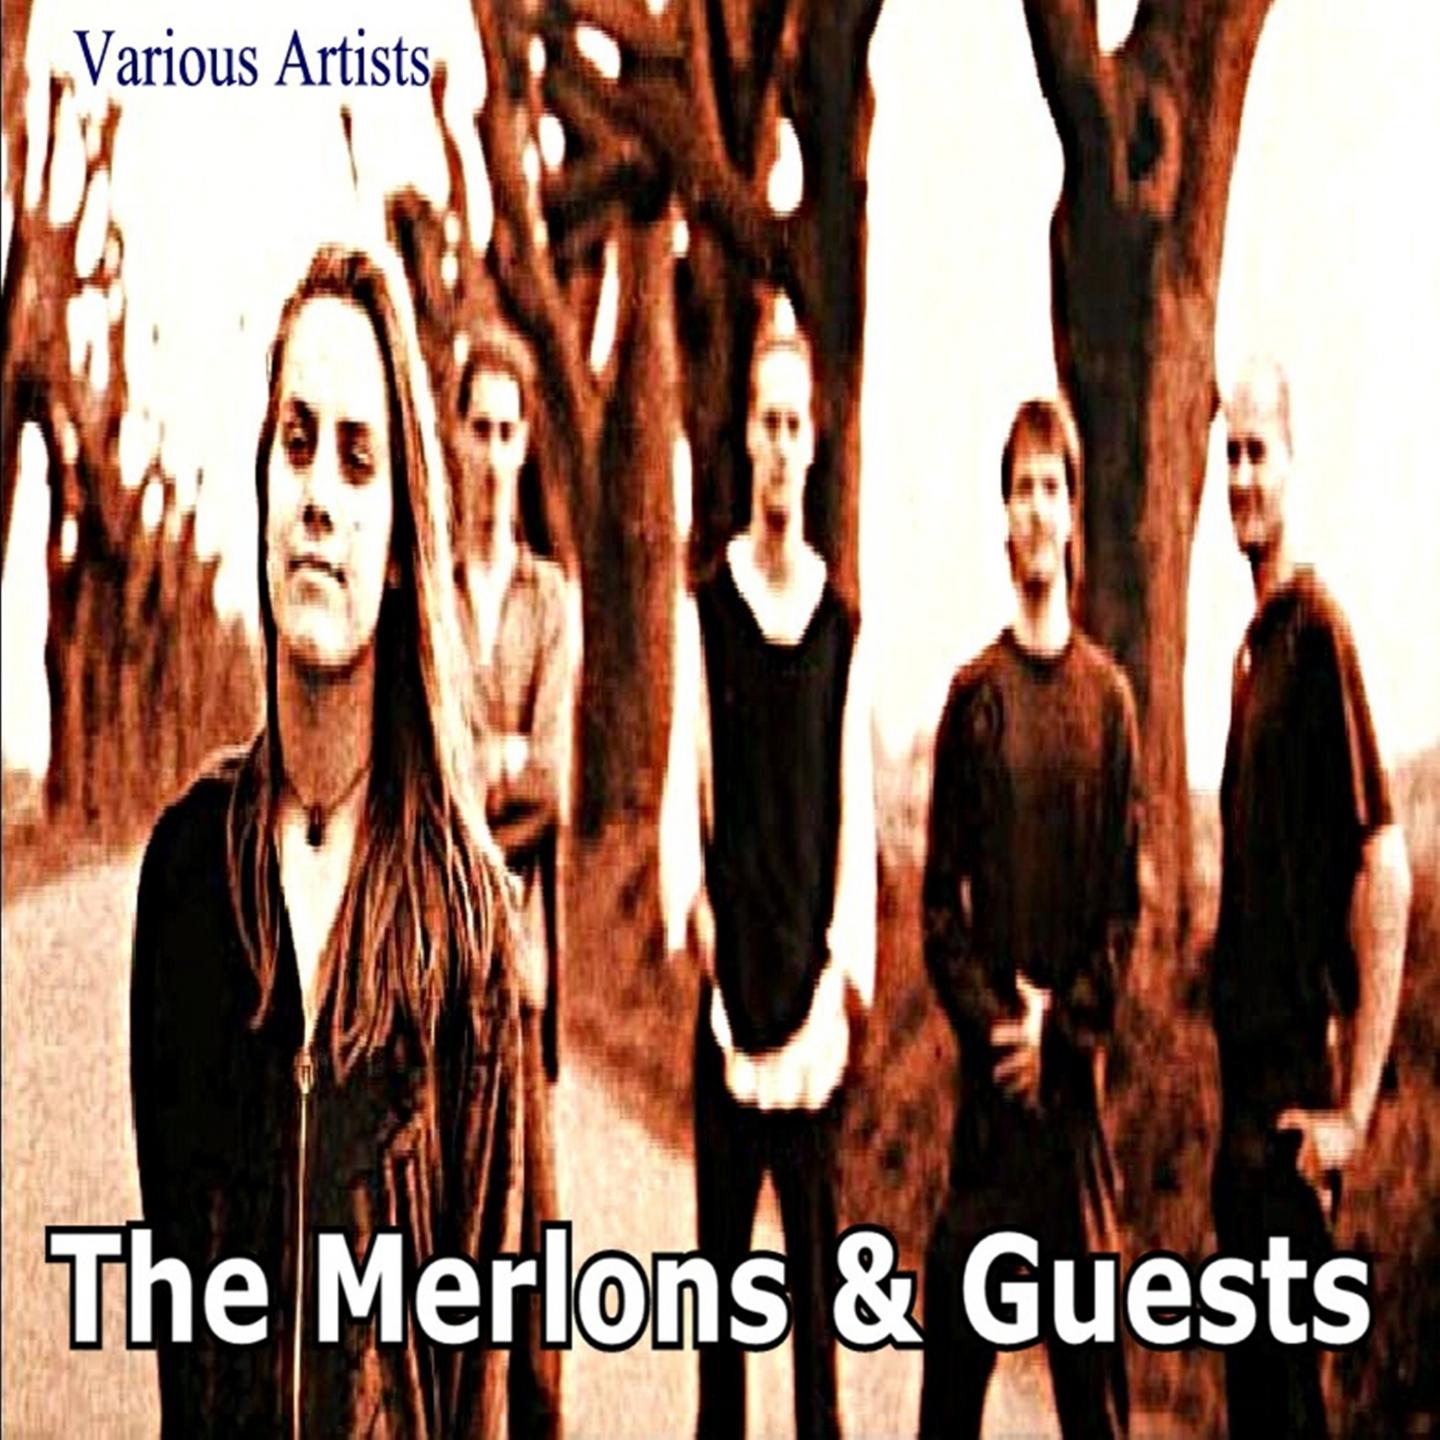 The Merlons & Guests